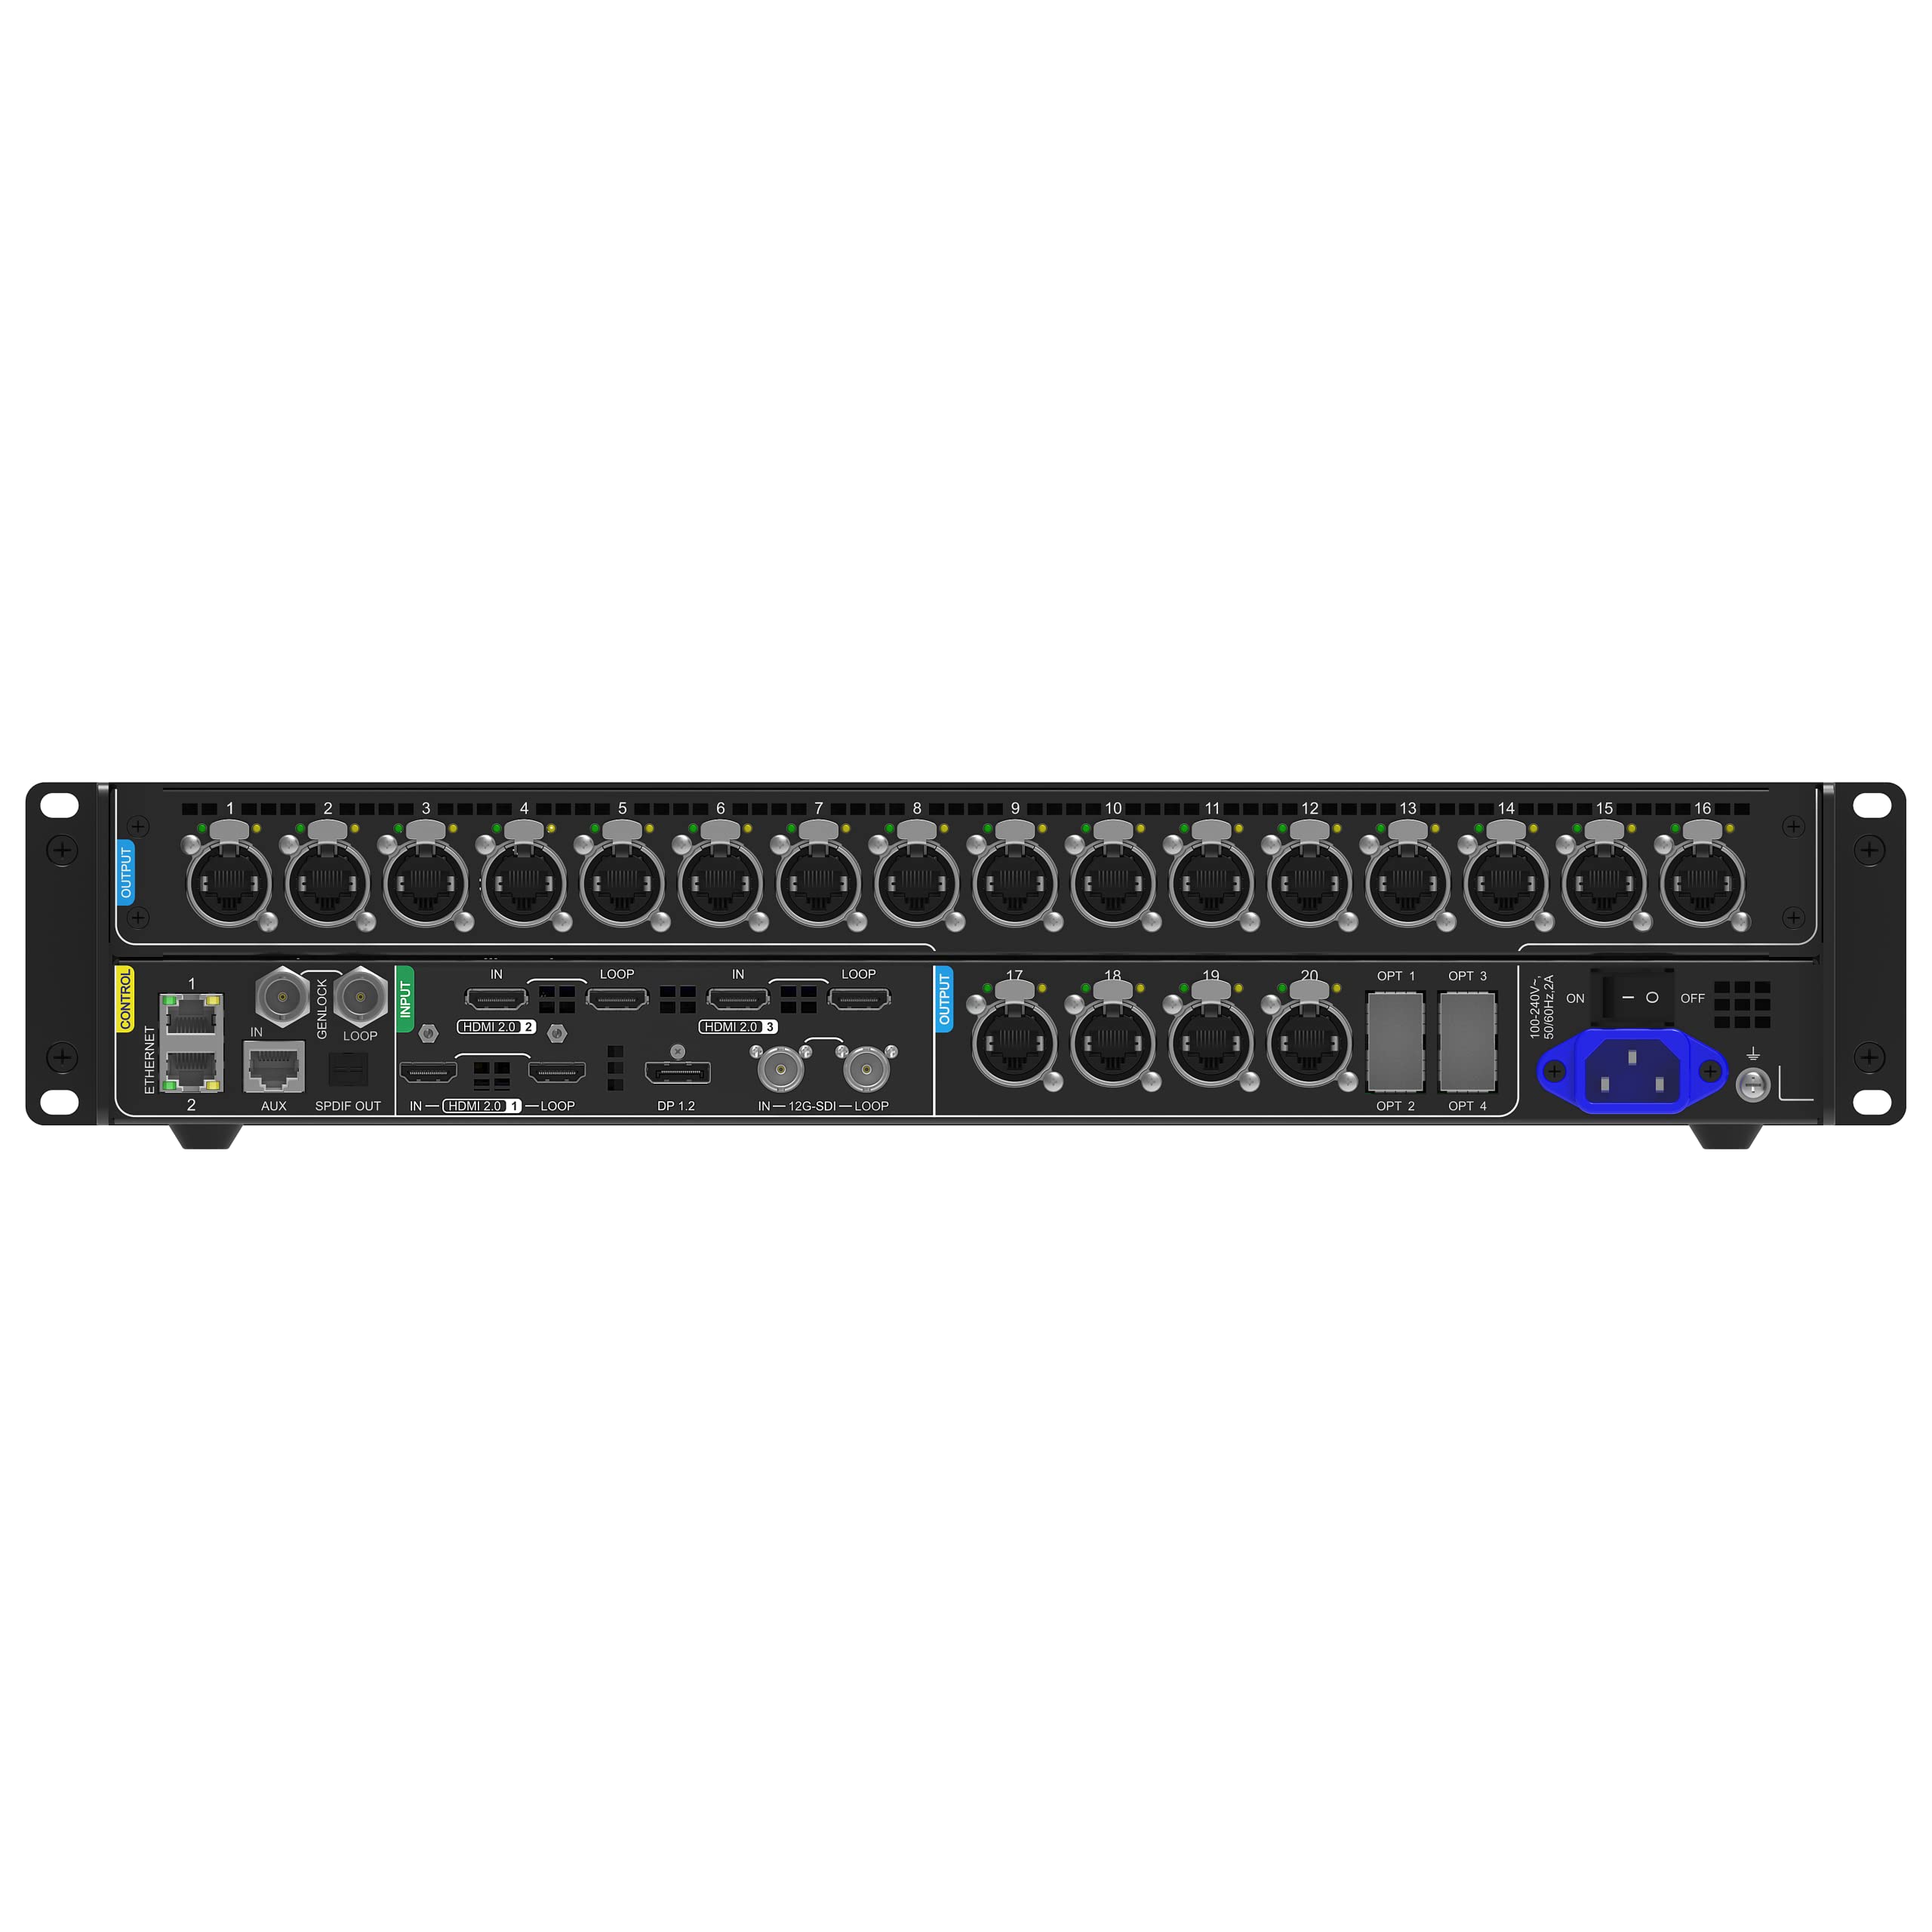 NovaStar MX40 Pro All-in-one LED Display Controller / Video Processor